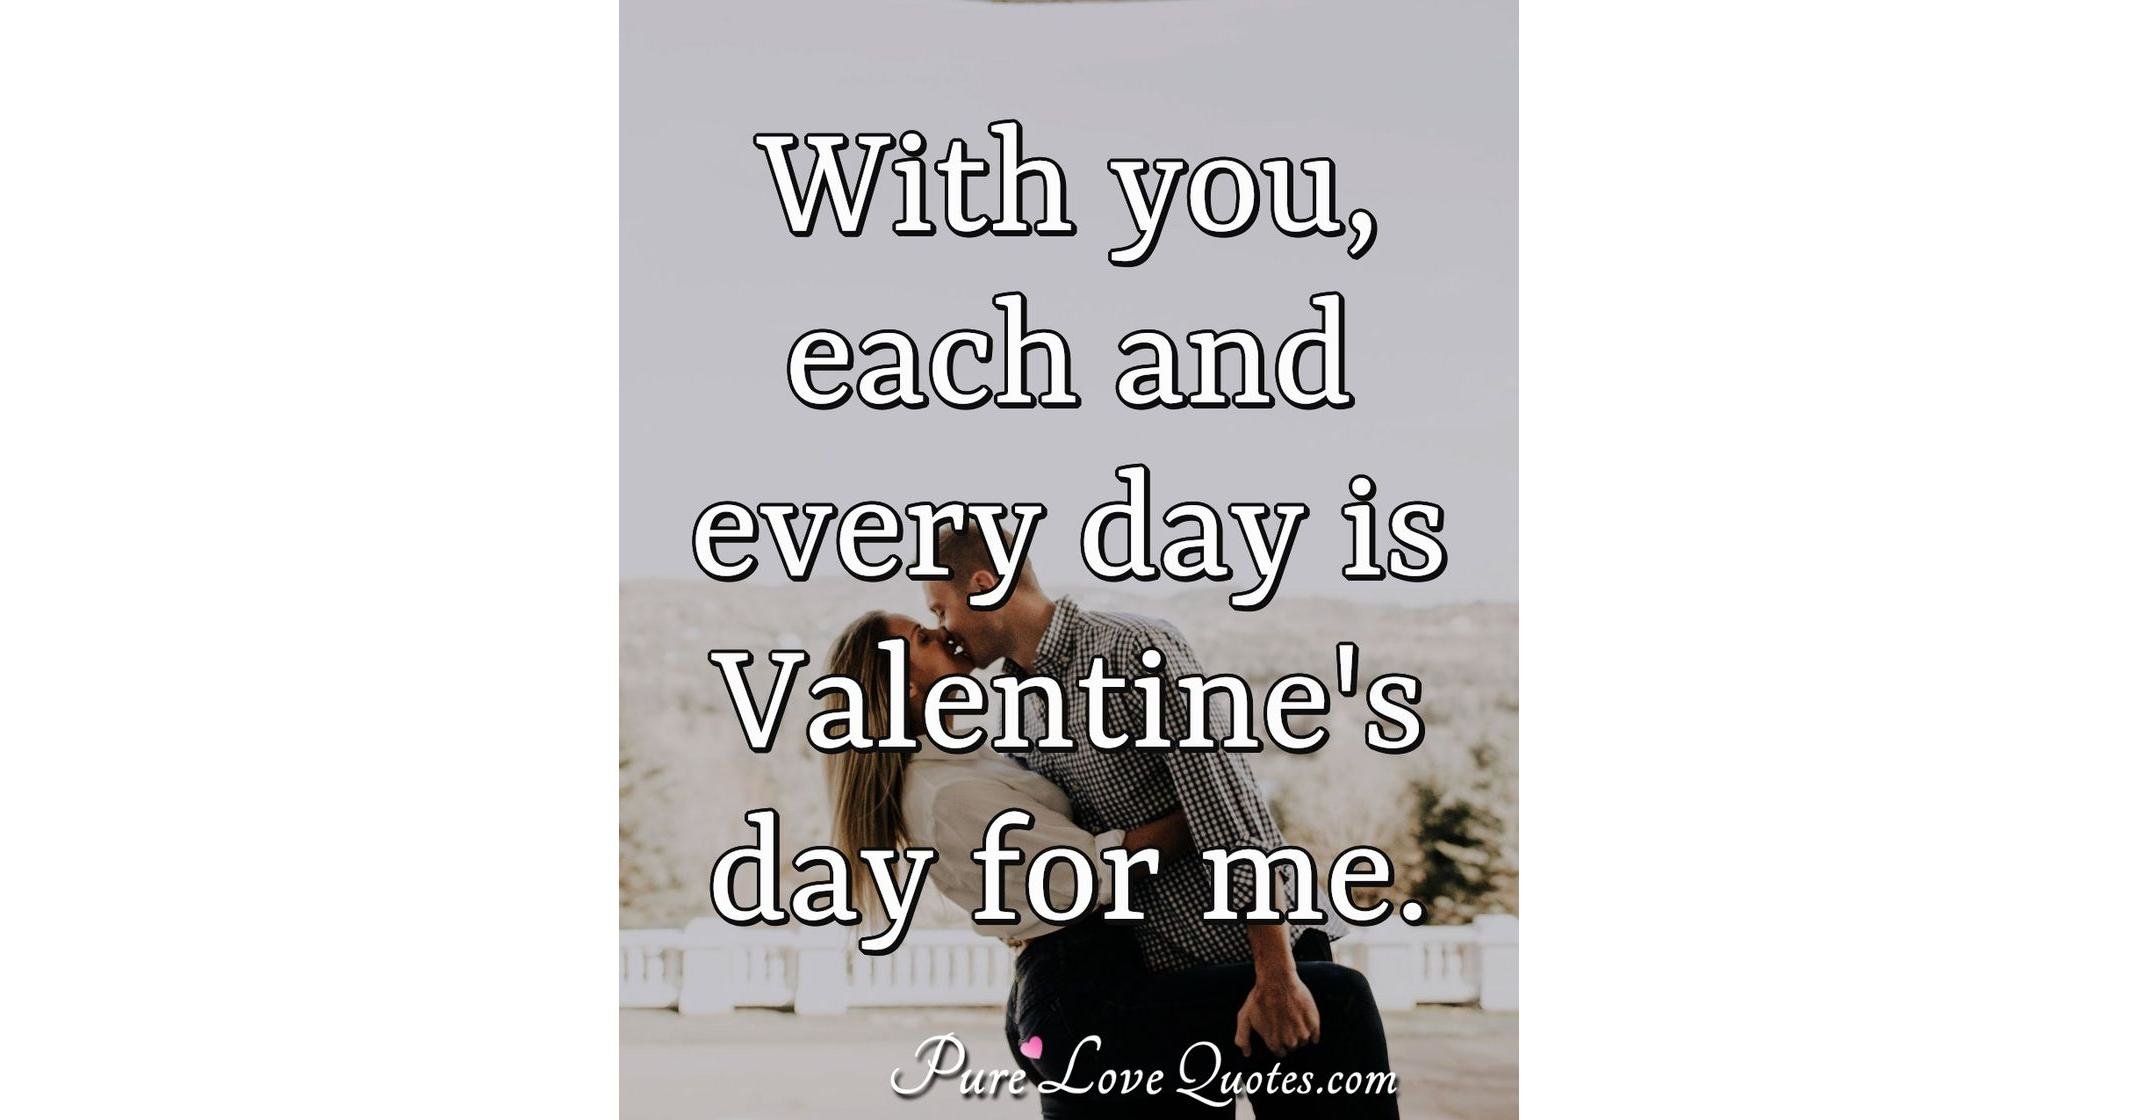 With You Each And Every Day Is Valentines Day For Me Purelovequotes 6895